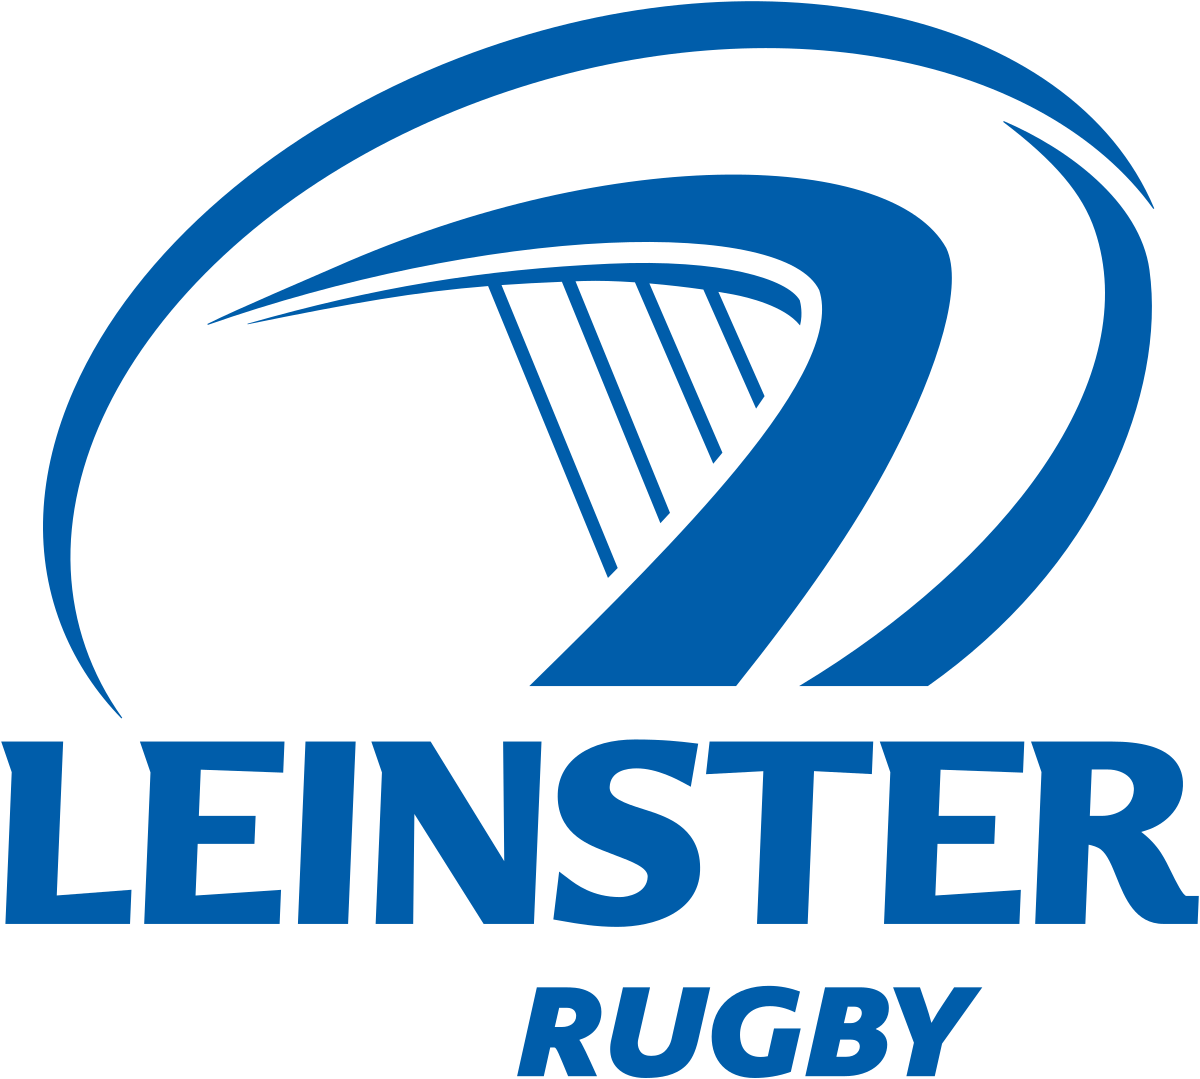 Leinster rugby